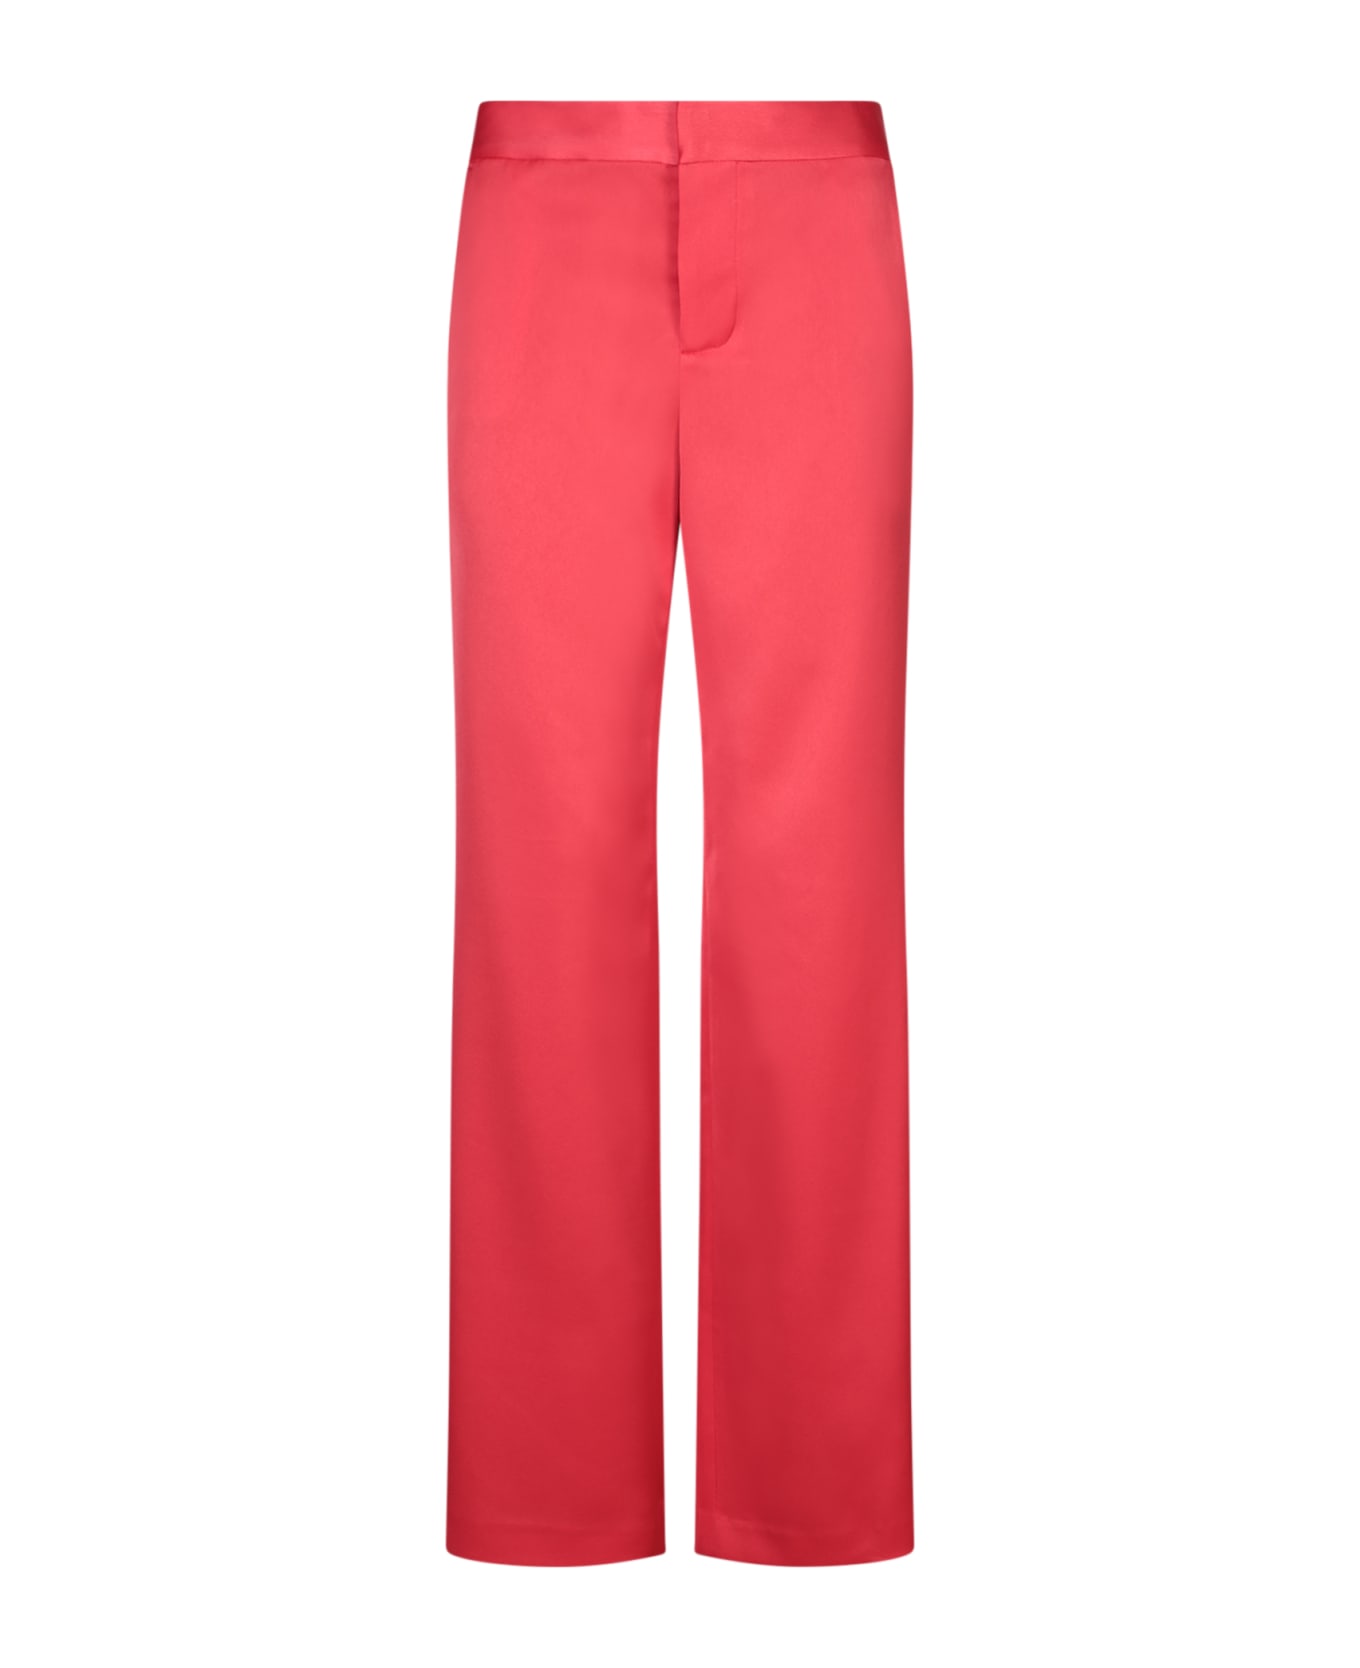 Alice + Olivia Red Satin Wide Leg Trousers - Red